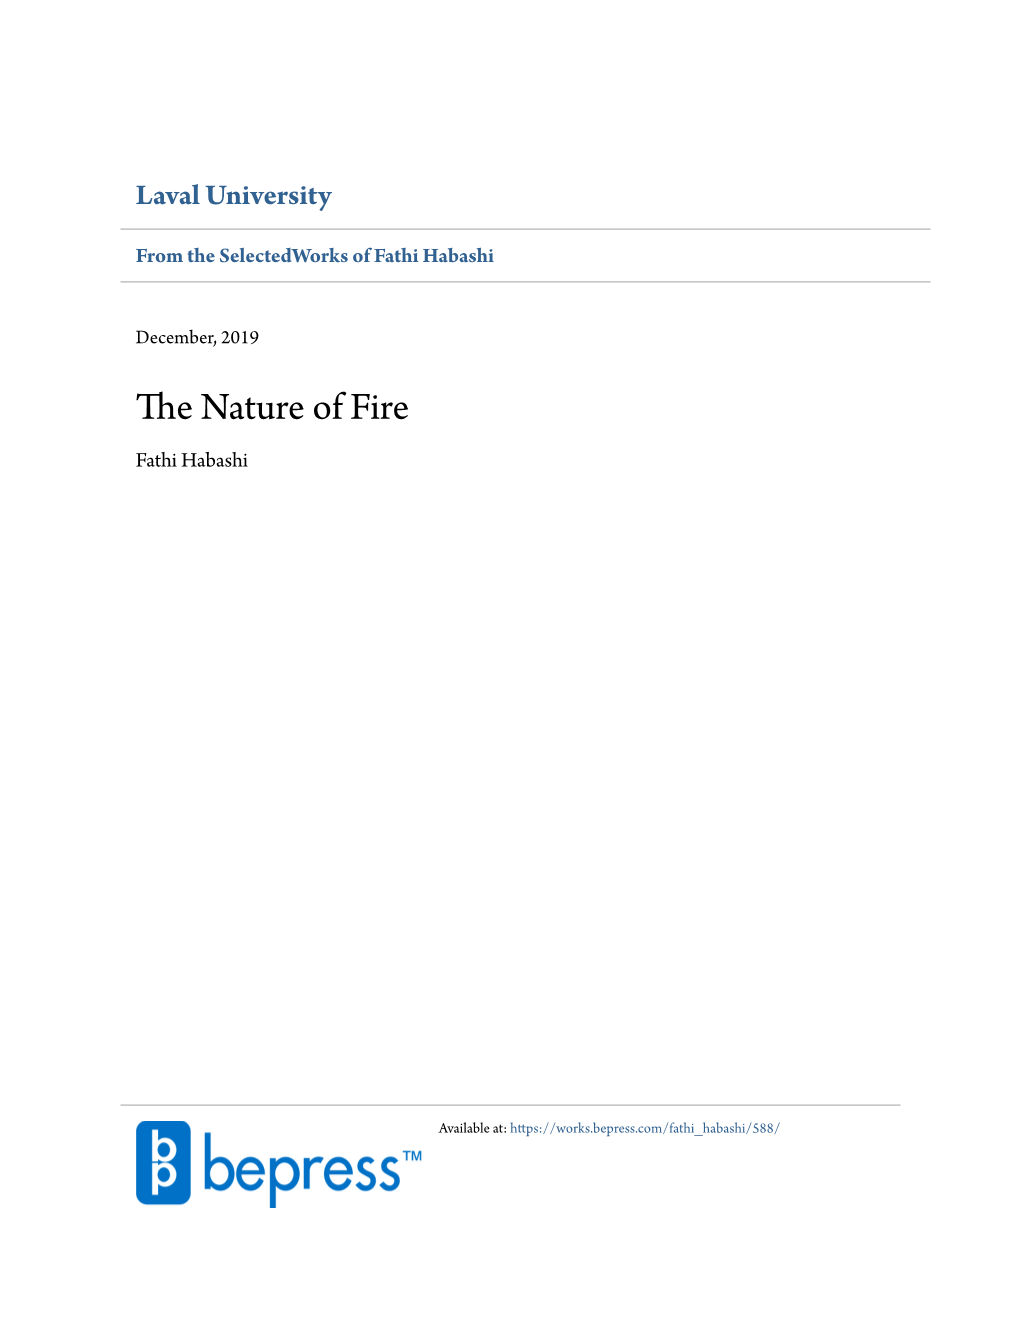 The Nature of Fire